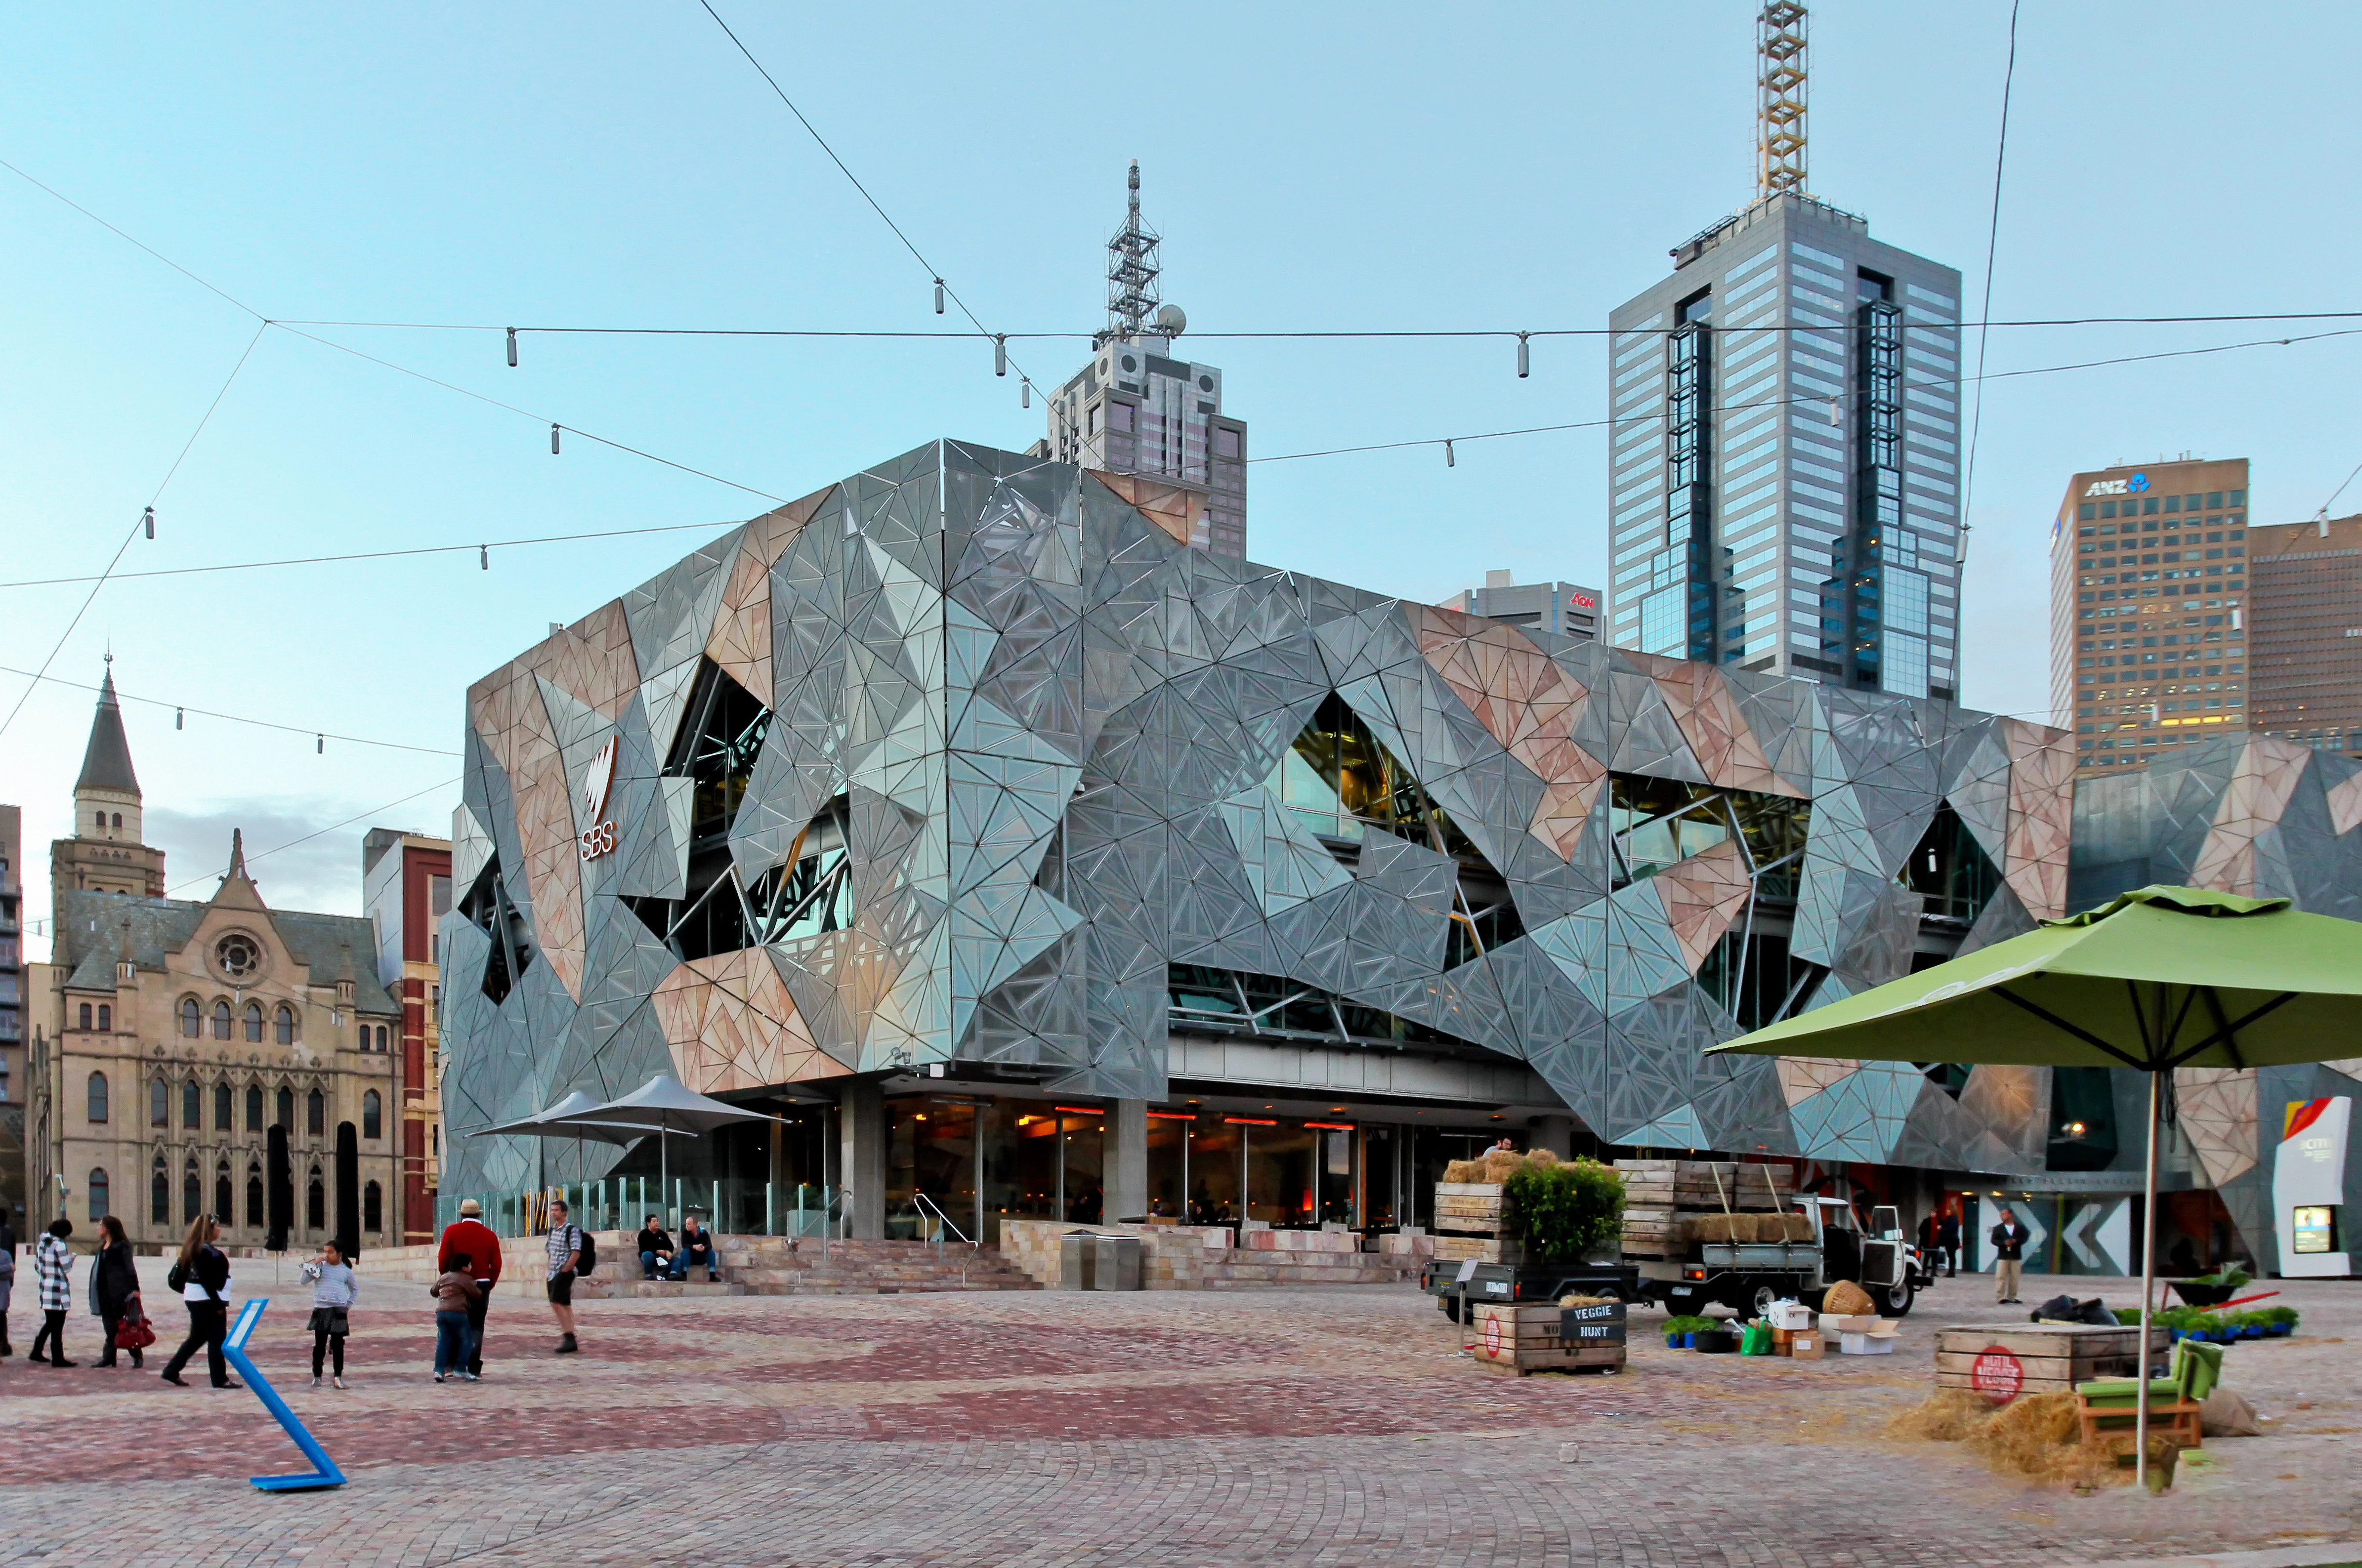 An image of the Australian Centre for the moving image building at Federation Square